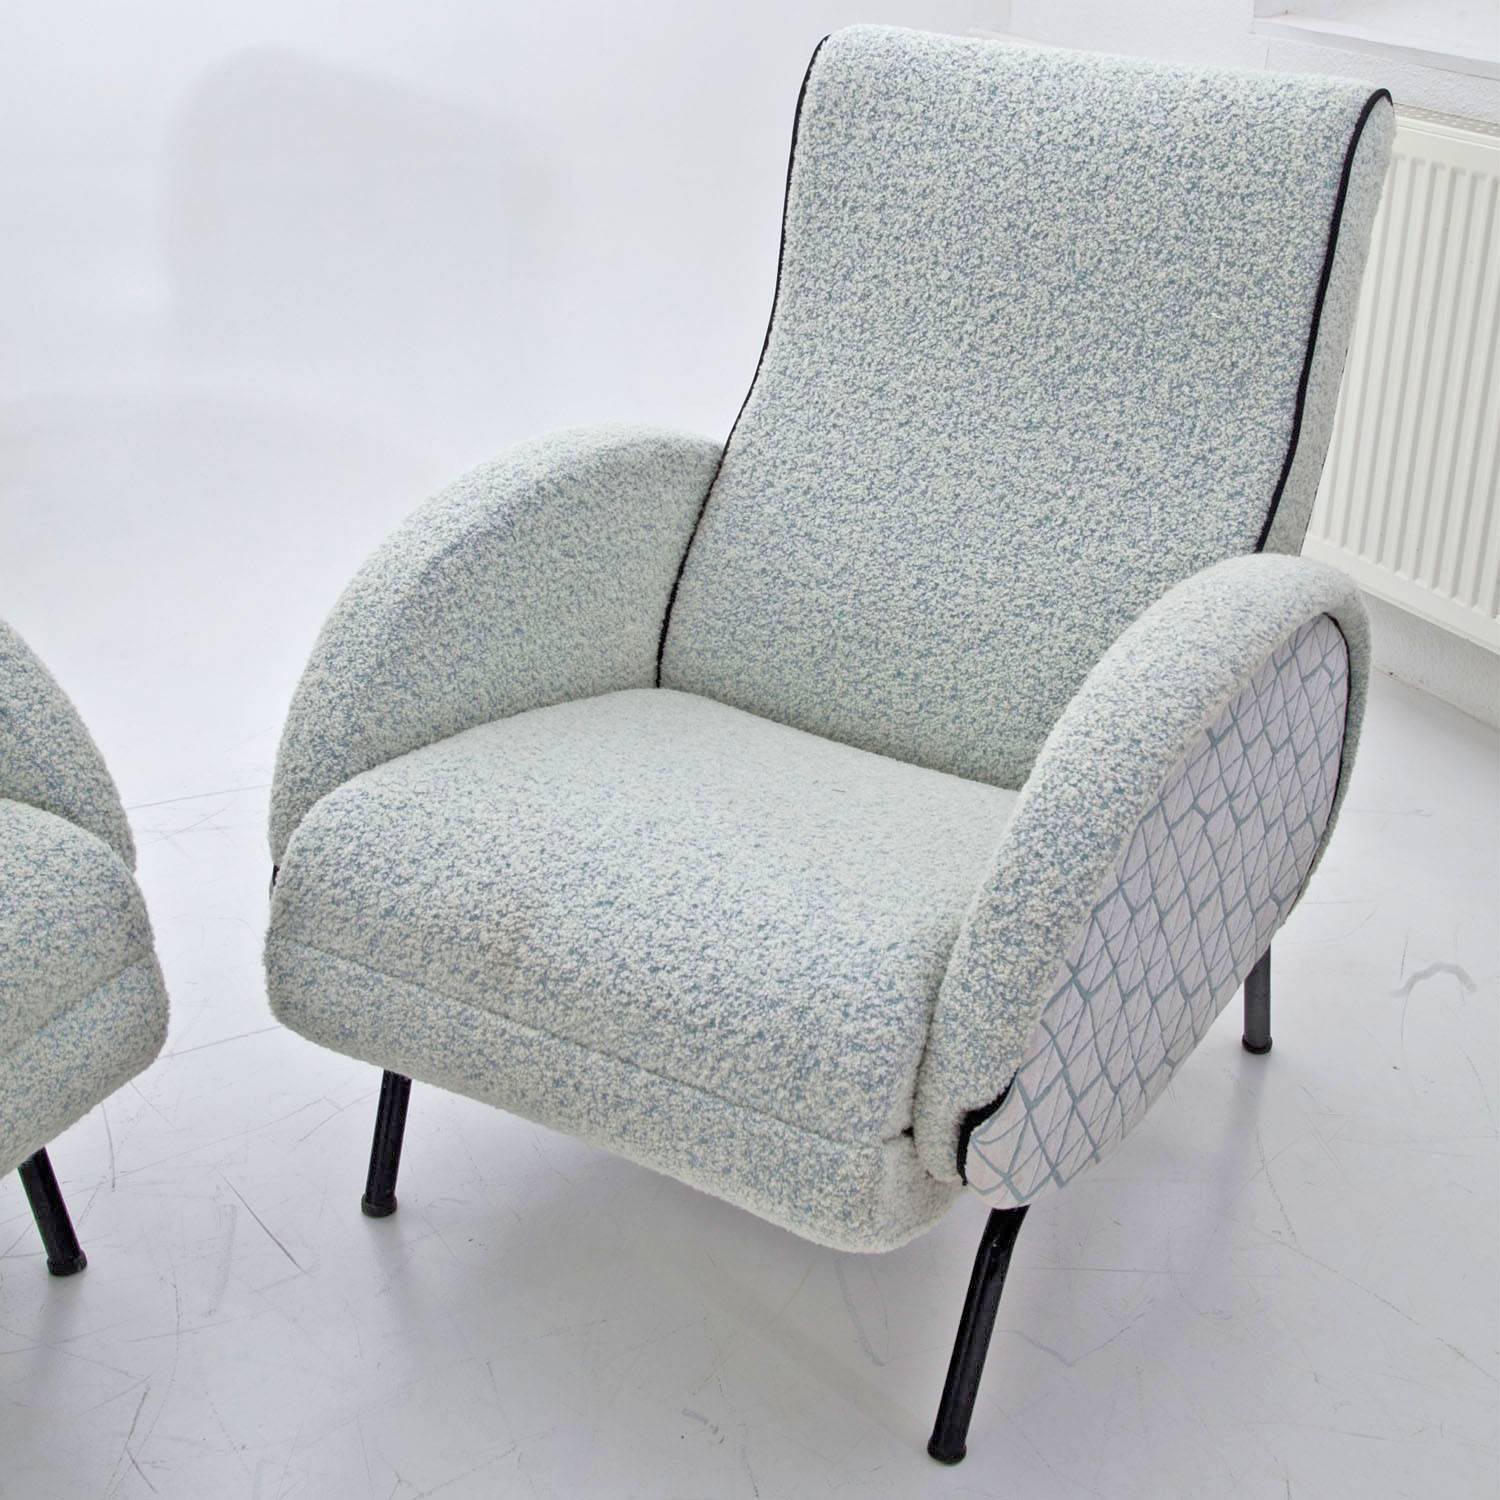 Pair of reclining lounge chairs on black iron feet with oval armrests. While leaning back, the footrests extend out. The armchairs were reupholstered with a high quality fabric in white and turquoise. Labelled on the rear iron bar.